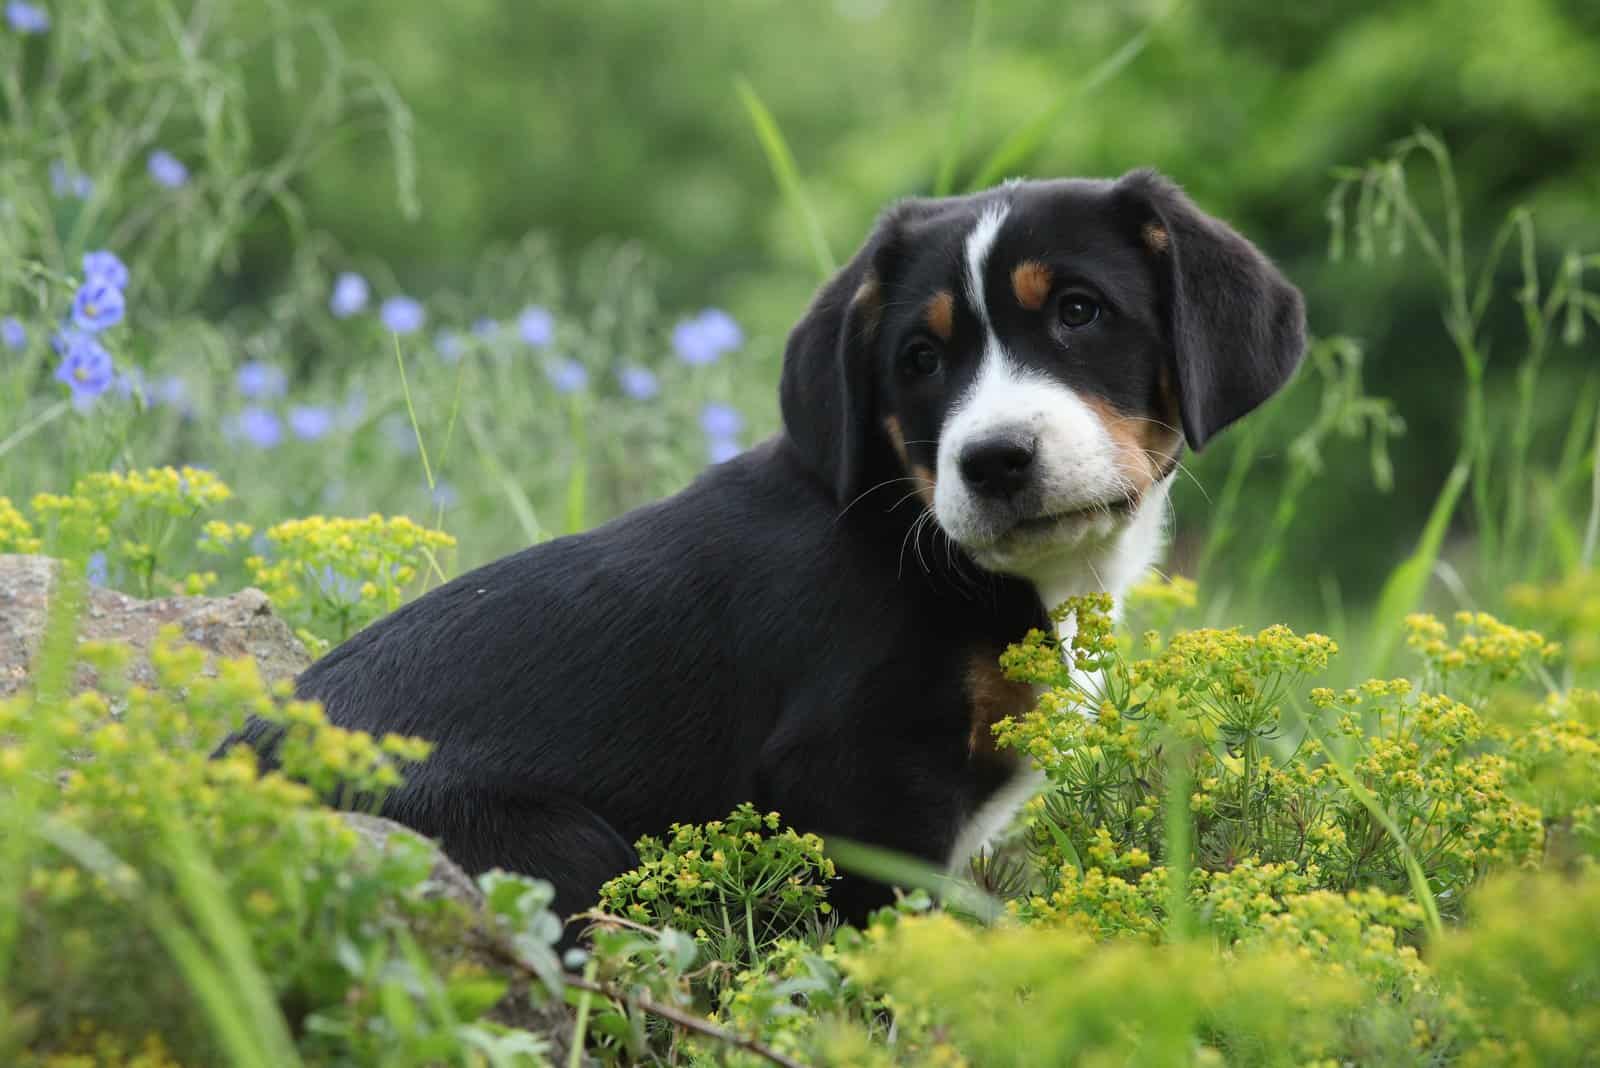 Amazing puppy of Greater Swiss Mountain Dog in the garden